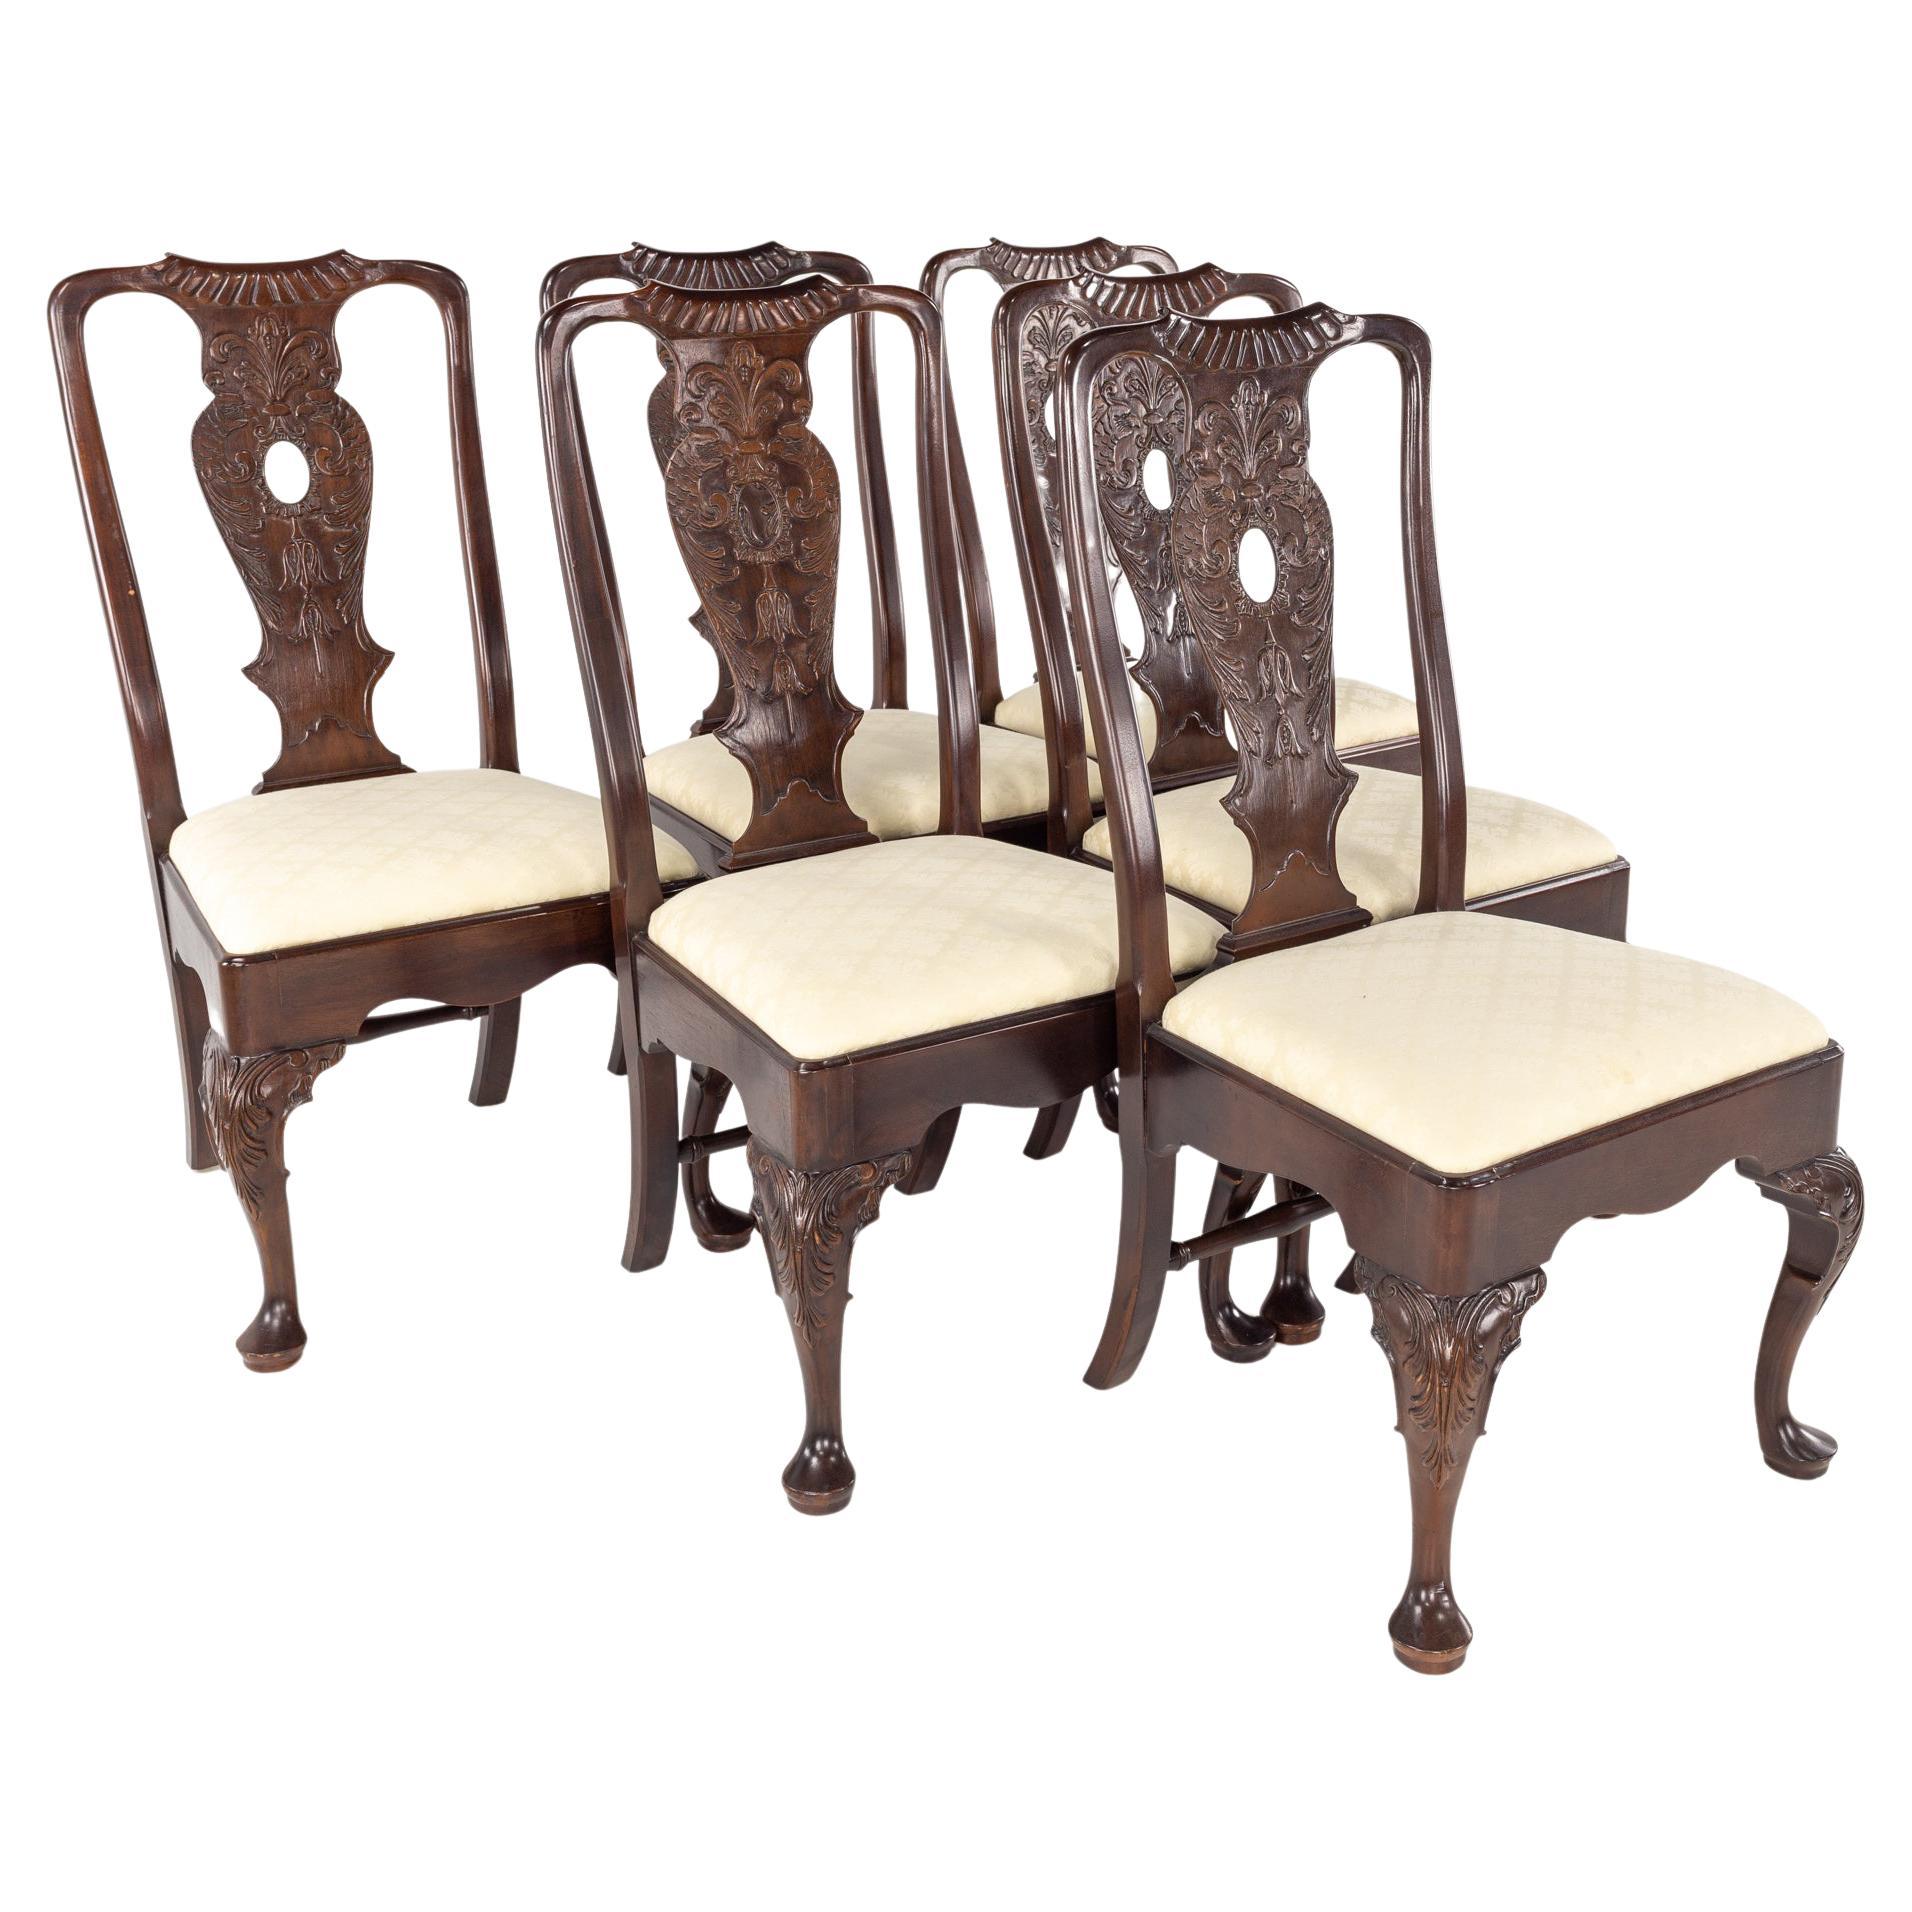 Henredon Aston Court Mahogany Dining Chairs, Set of 6 For Sale